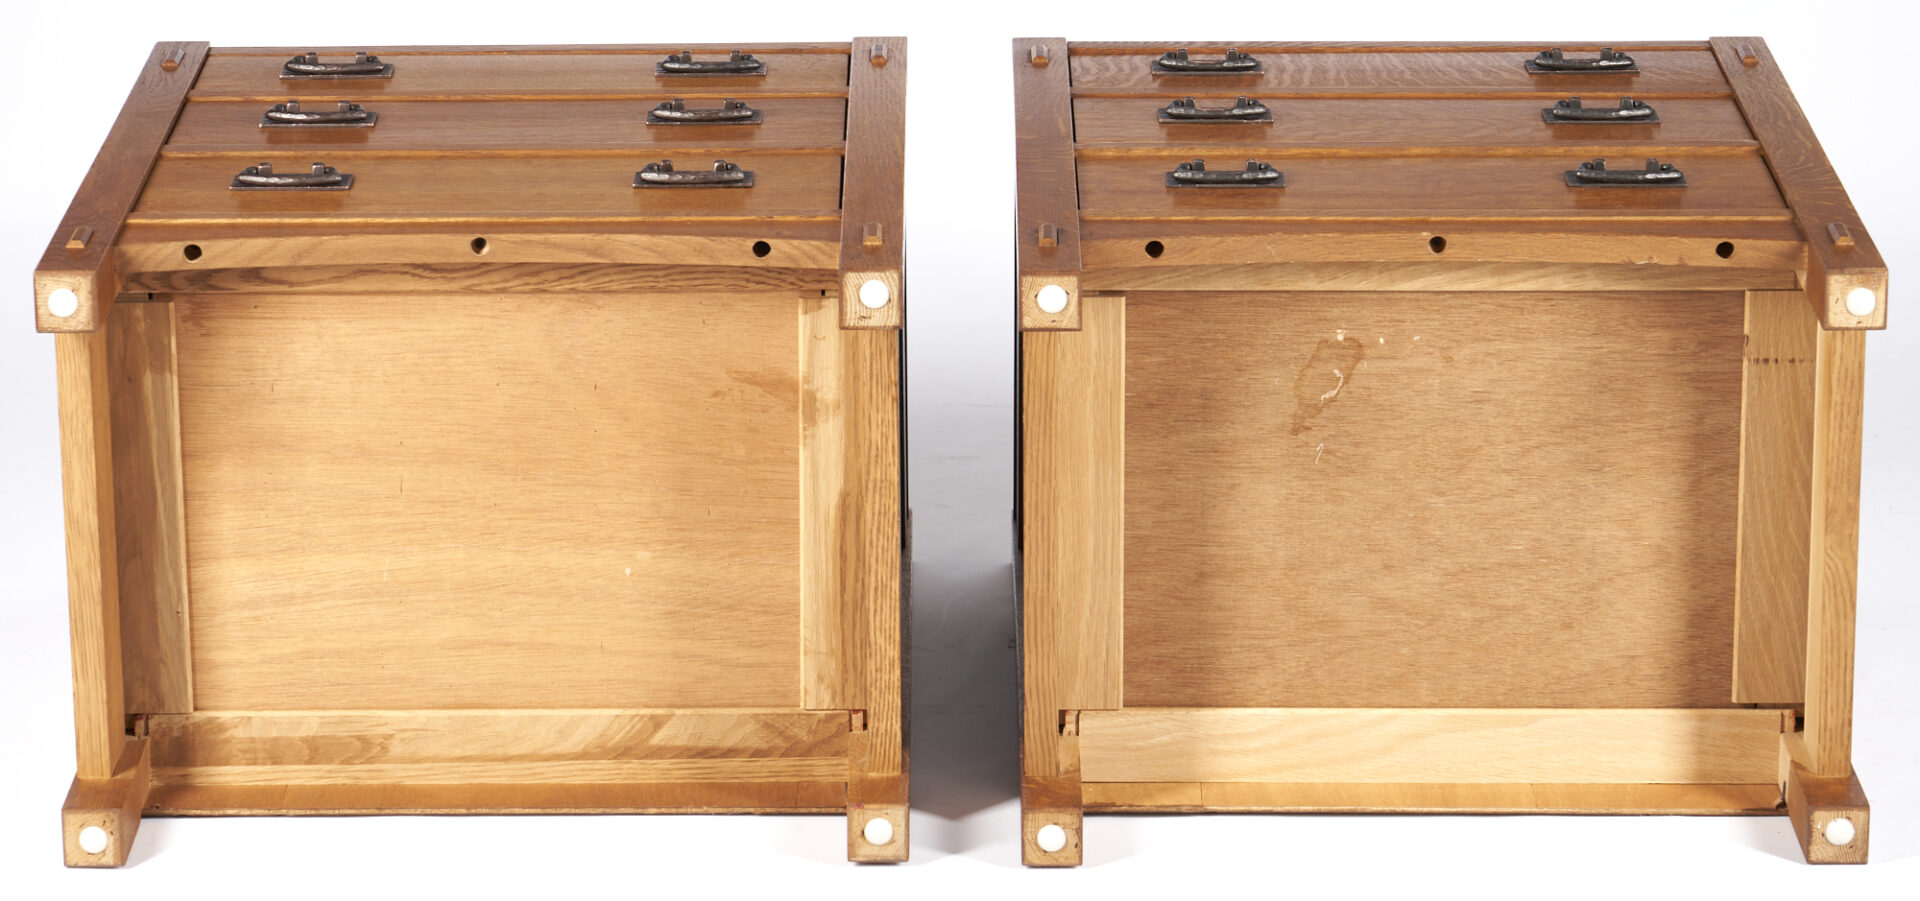 Lot 424: Stickley NY/Audi Mission Night Stands or Bedside Tables, Pair